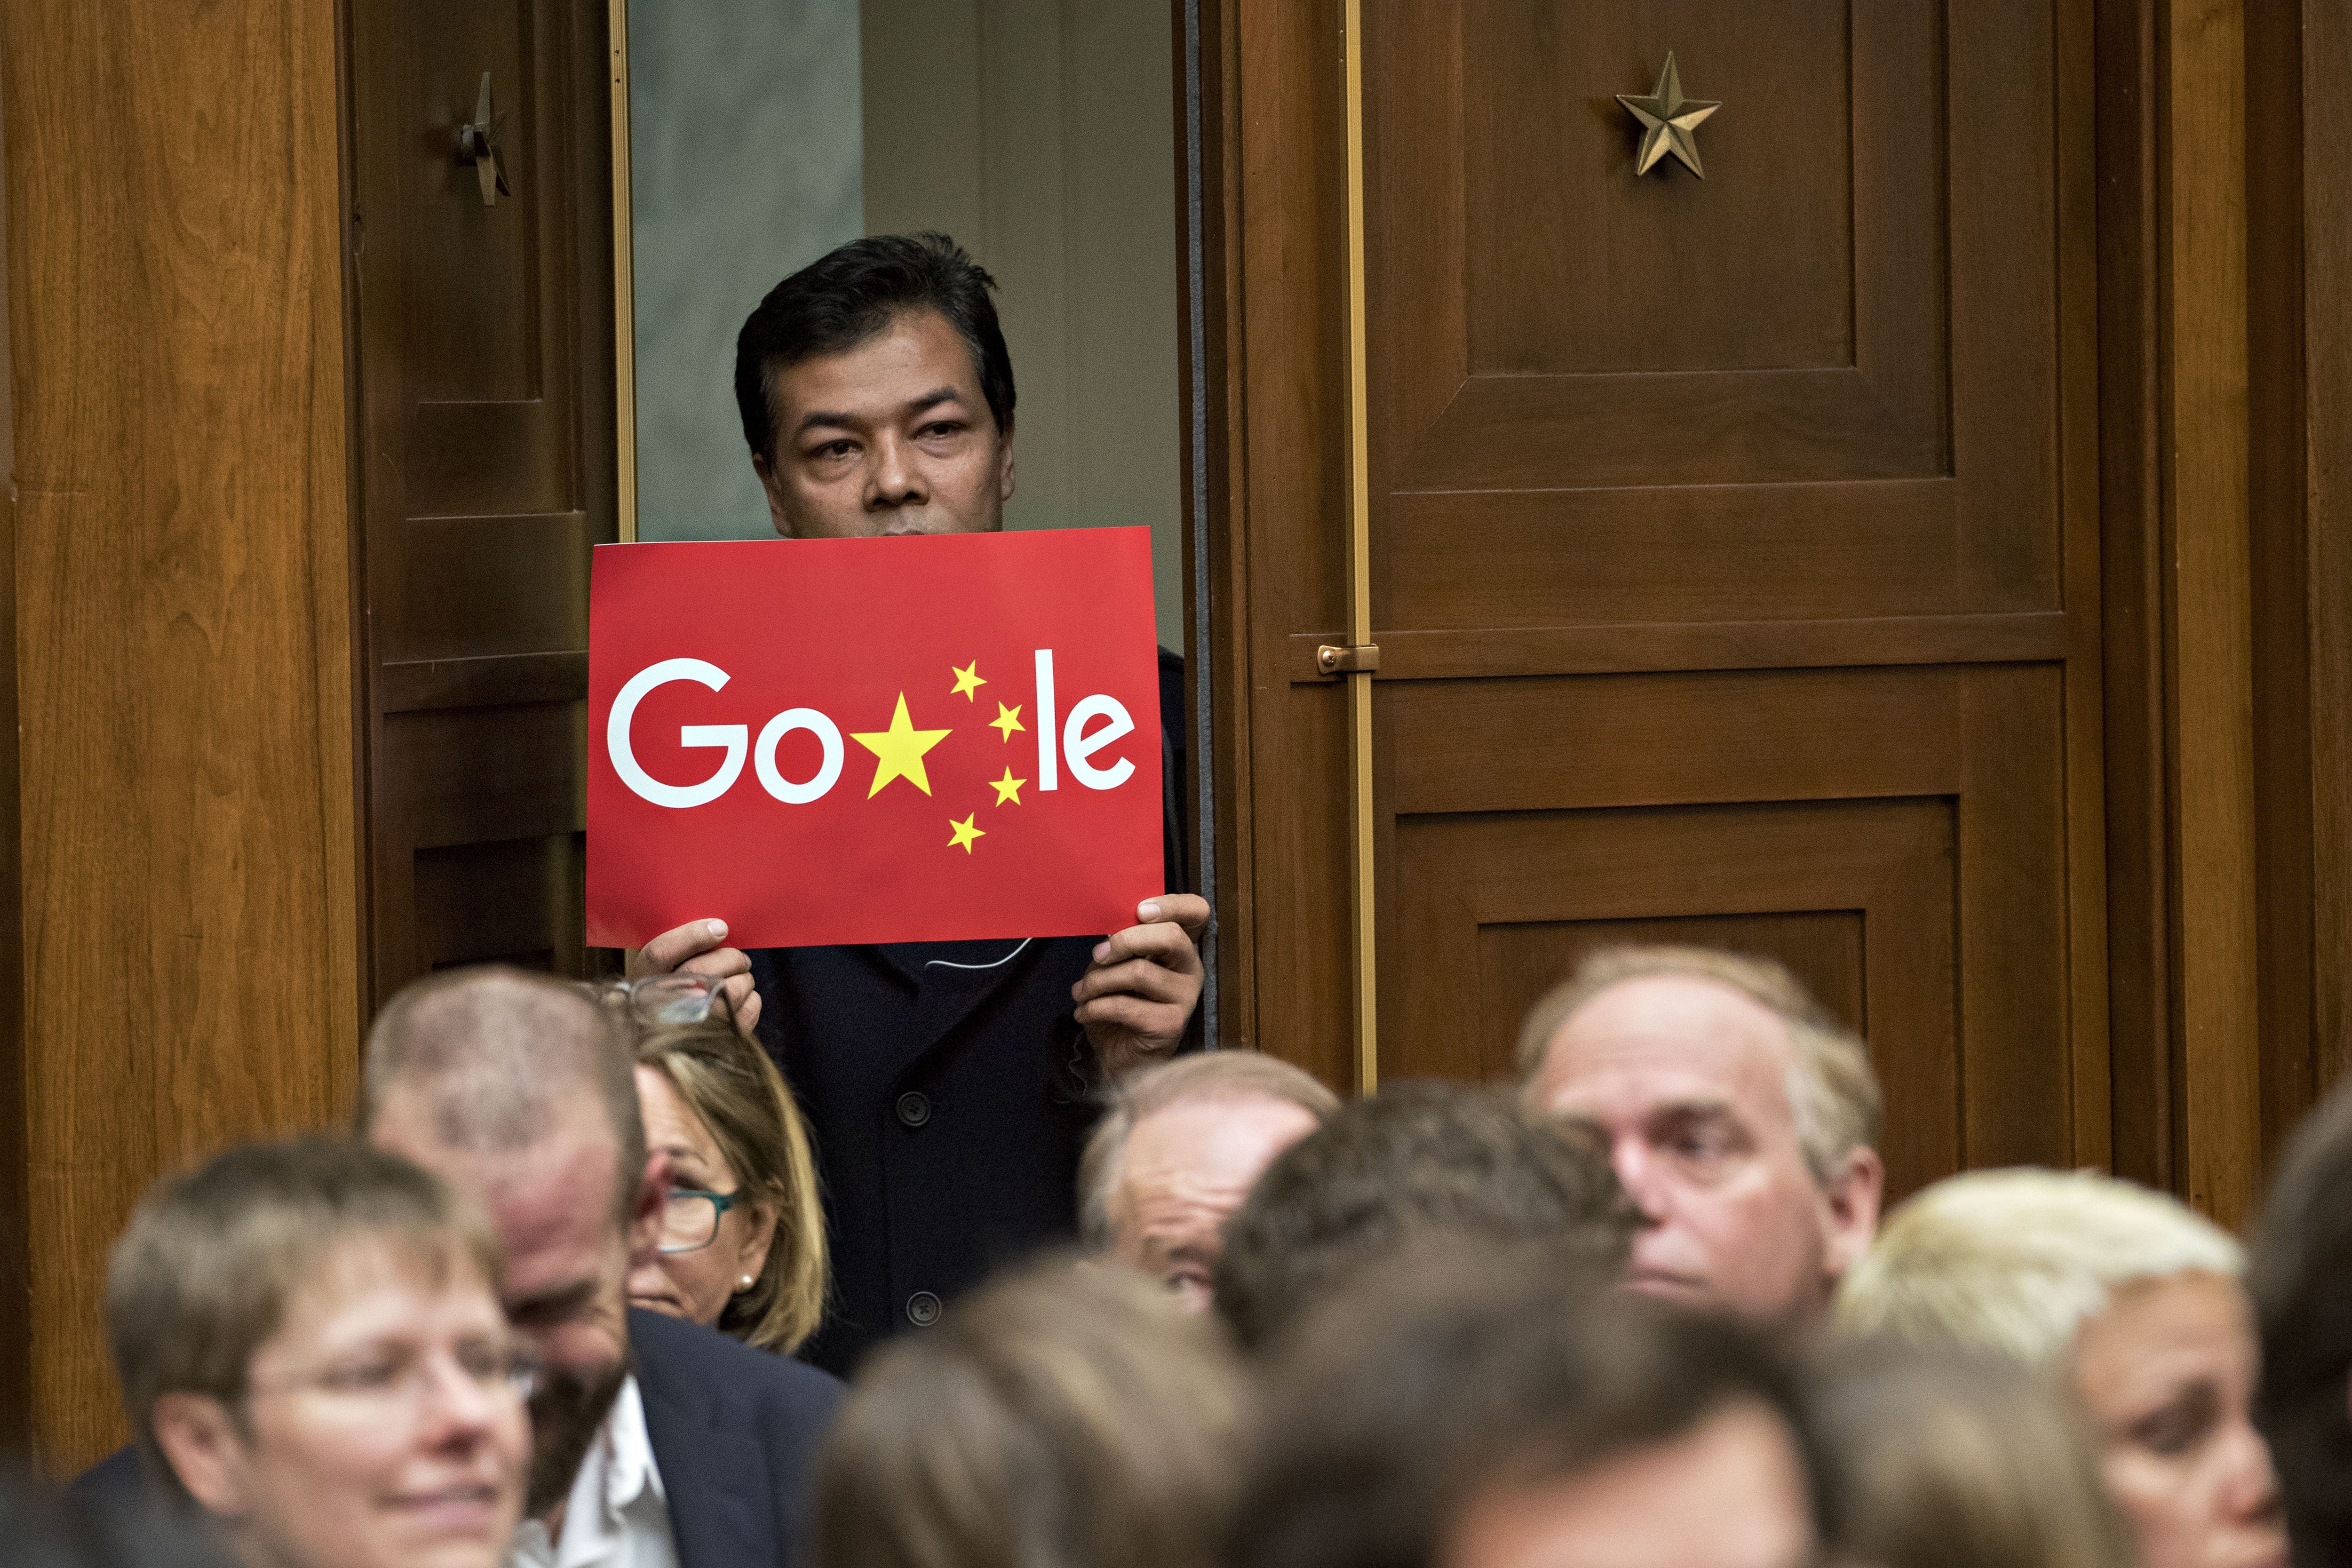 A man holds up a sign featuring an altered Google logo during a House Judiciary Committee hearing with Google CEO Sundar Pichai in Washington in December 2018. Photo: Bloomberg